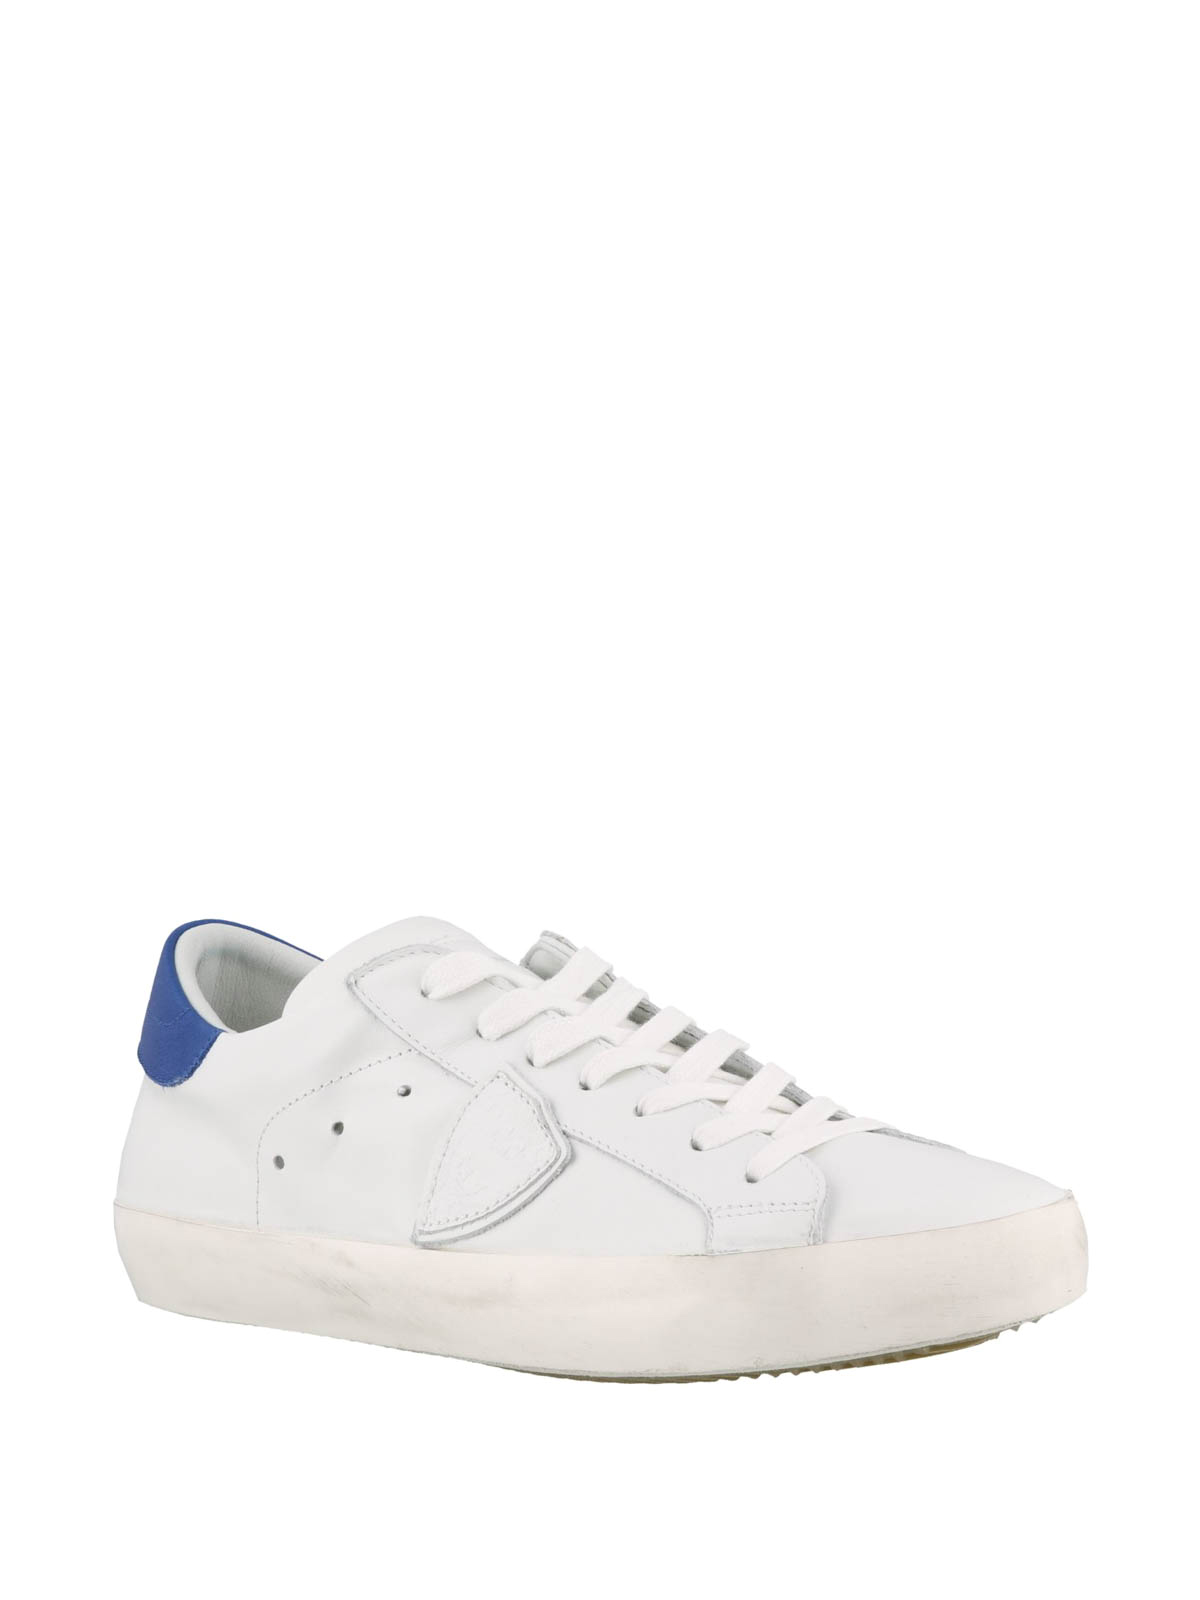 Philippe Model - Paris white blue sneakers - trainers - CLLUVN11